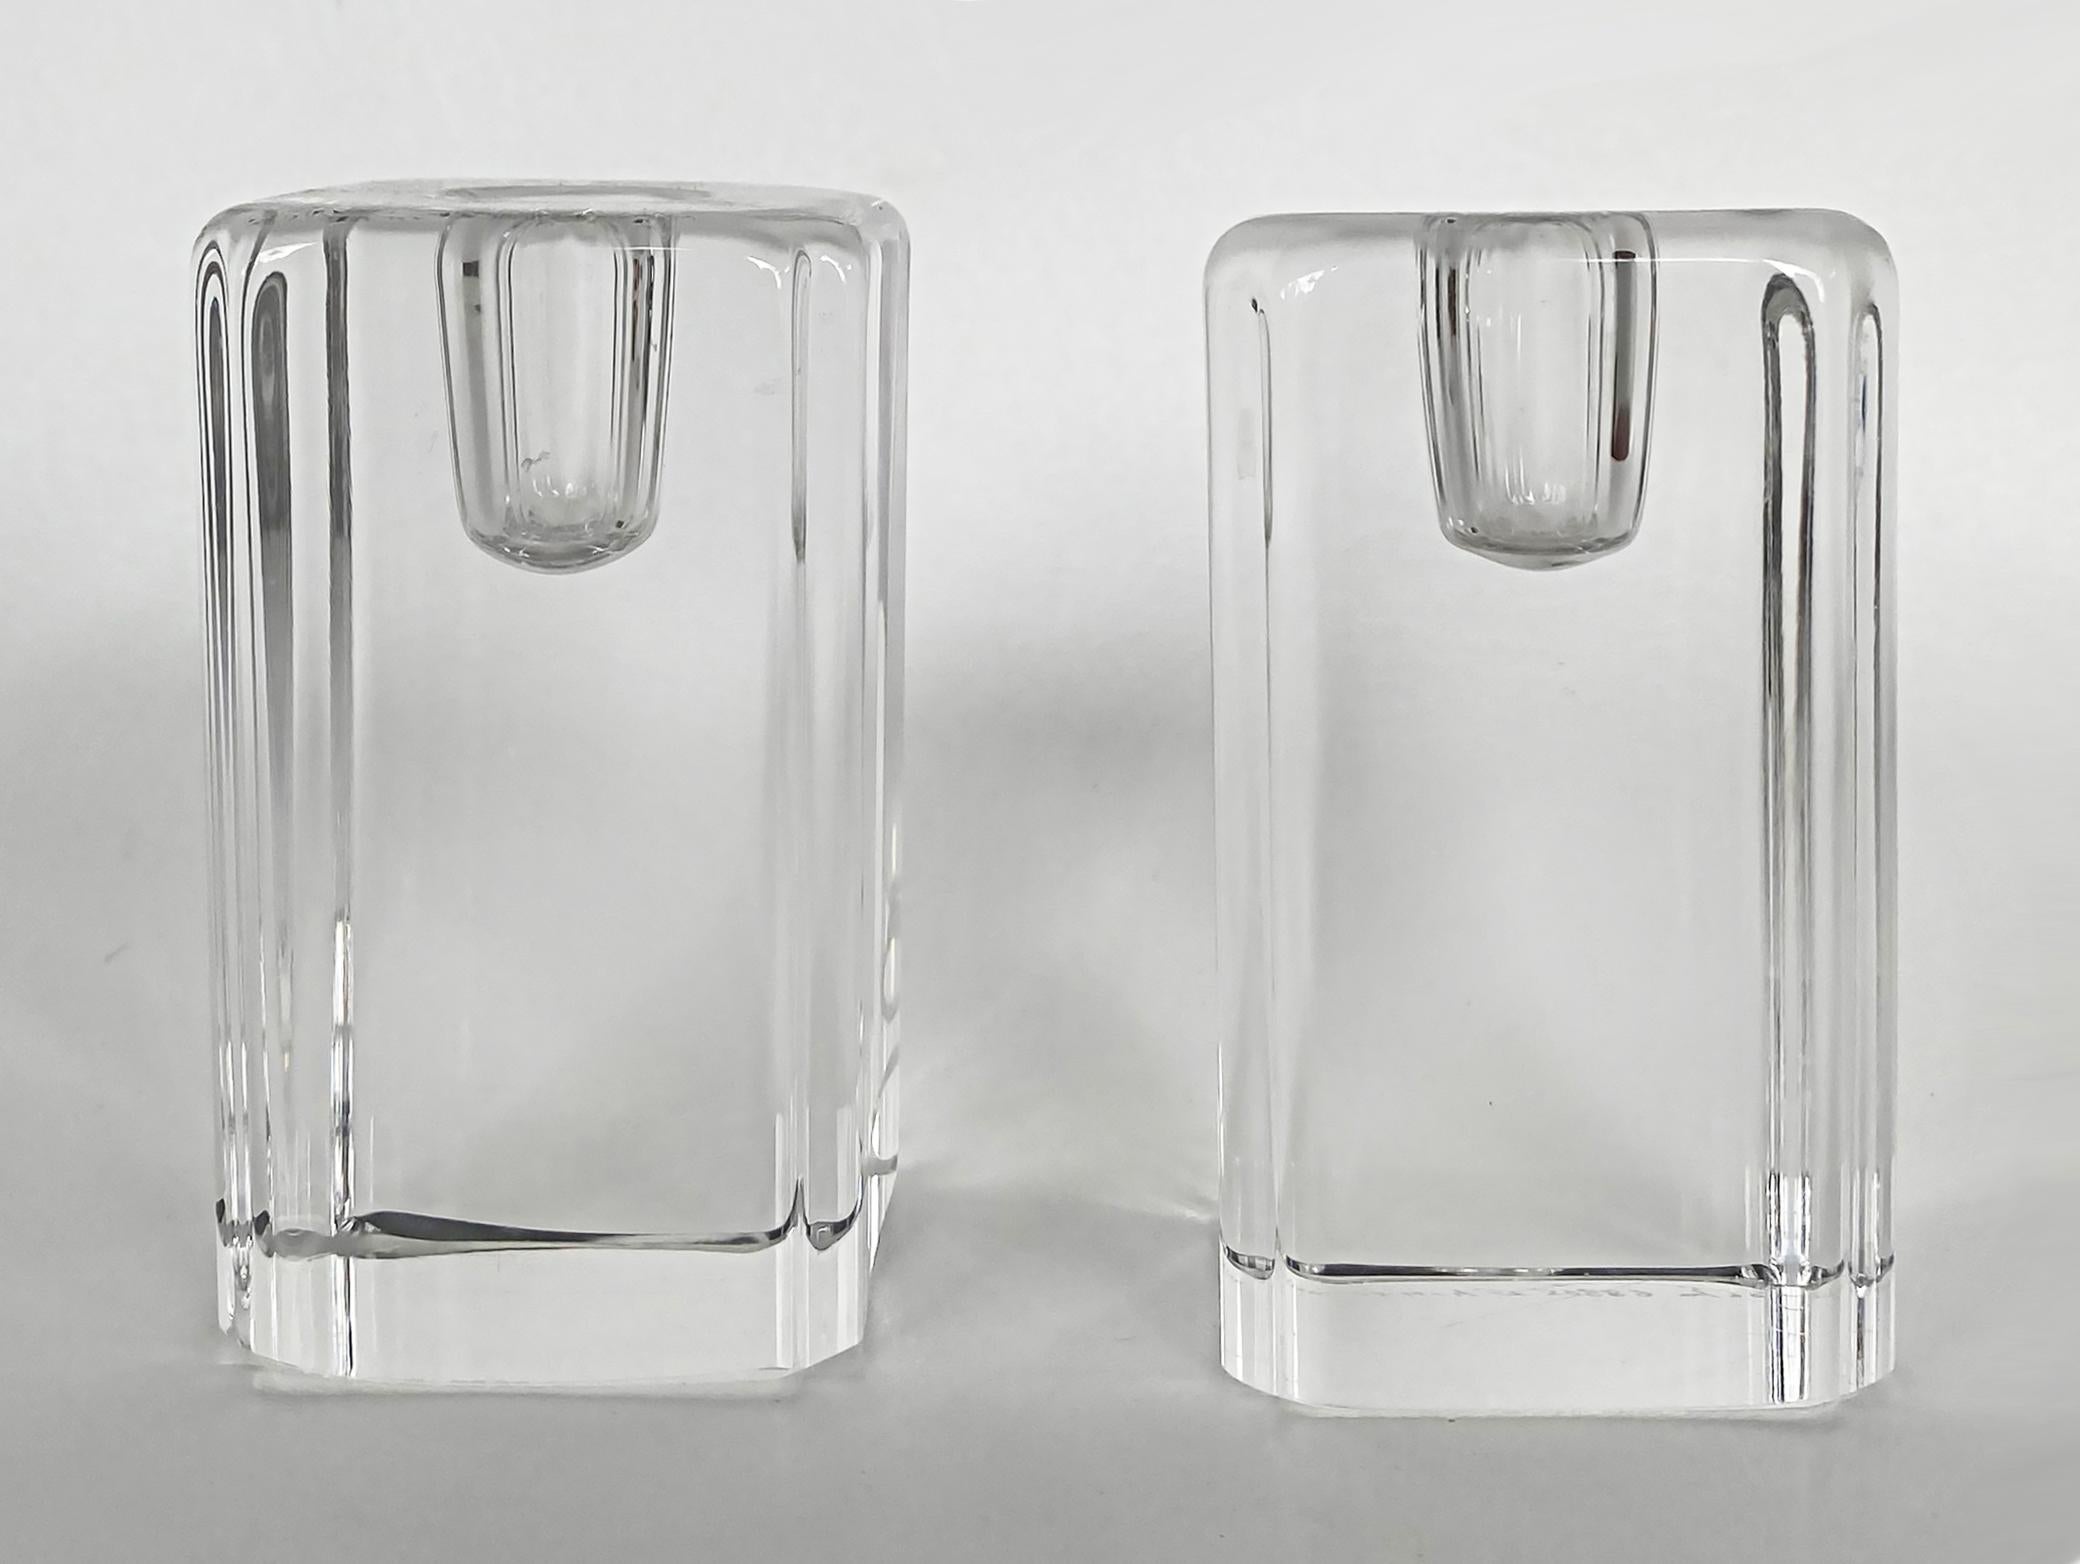 Kosta Boda Anna Ehrner short crystal candle holders, pair

Offered for sale are two short block-style candle holders in clear crystal, signed Kosta and Ehrner underneath on the bases. Each base is hand-signed with Kosta, the model number, and